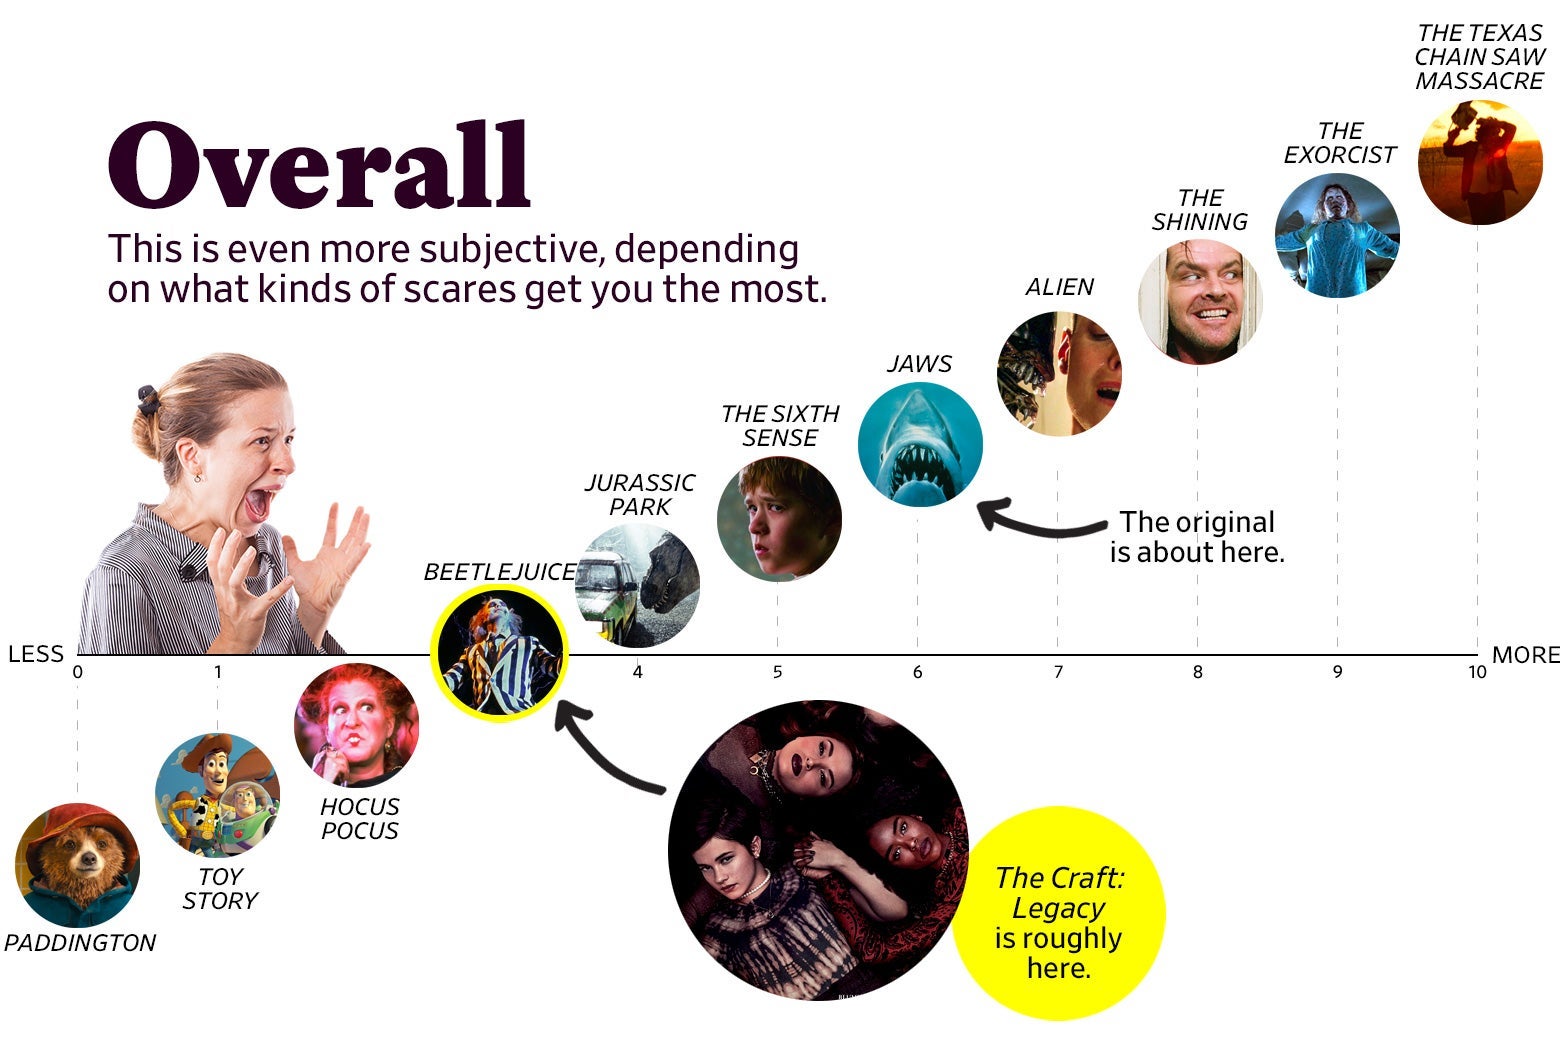 A chart titled “Overall: This is even more subjective, depending on what kinds of scares get you the most” shows that The Craft: Legacy ranks as a 3 overall, roughly the same as Beetlejuice, while the original ranks a 6, roughly the same as Jaws. The scale ranges from Paddington (0) to the original Texas Chain Saw Massacre (10).